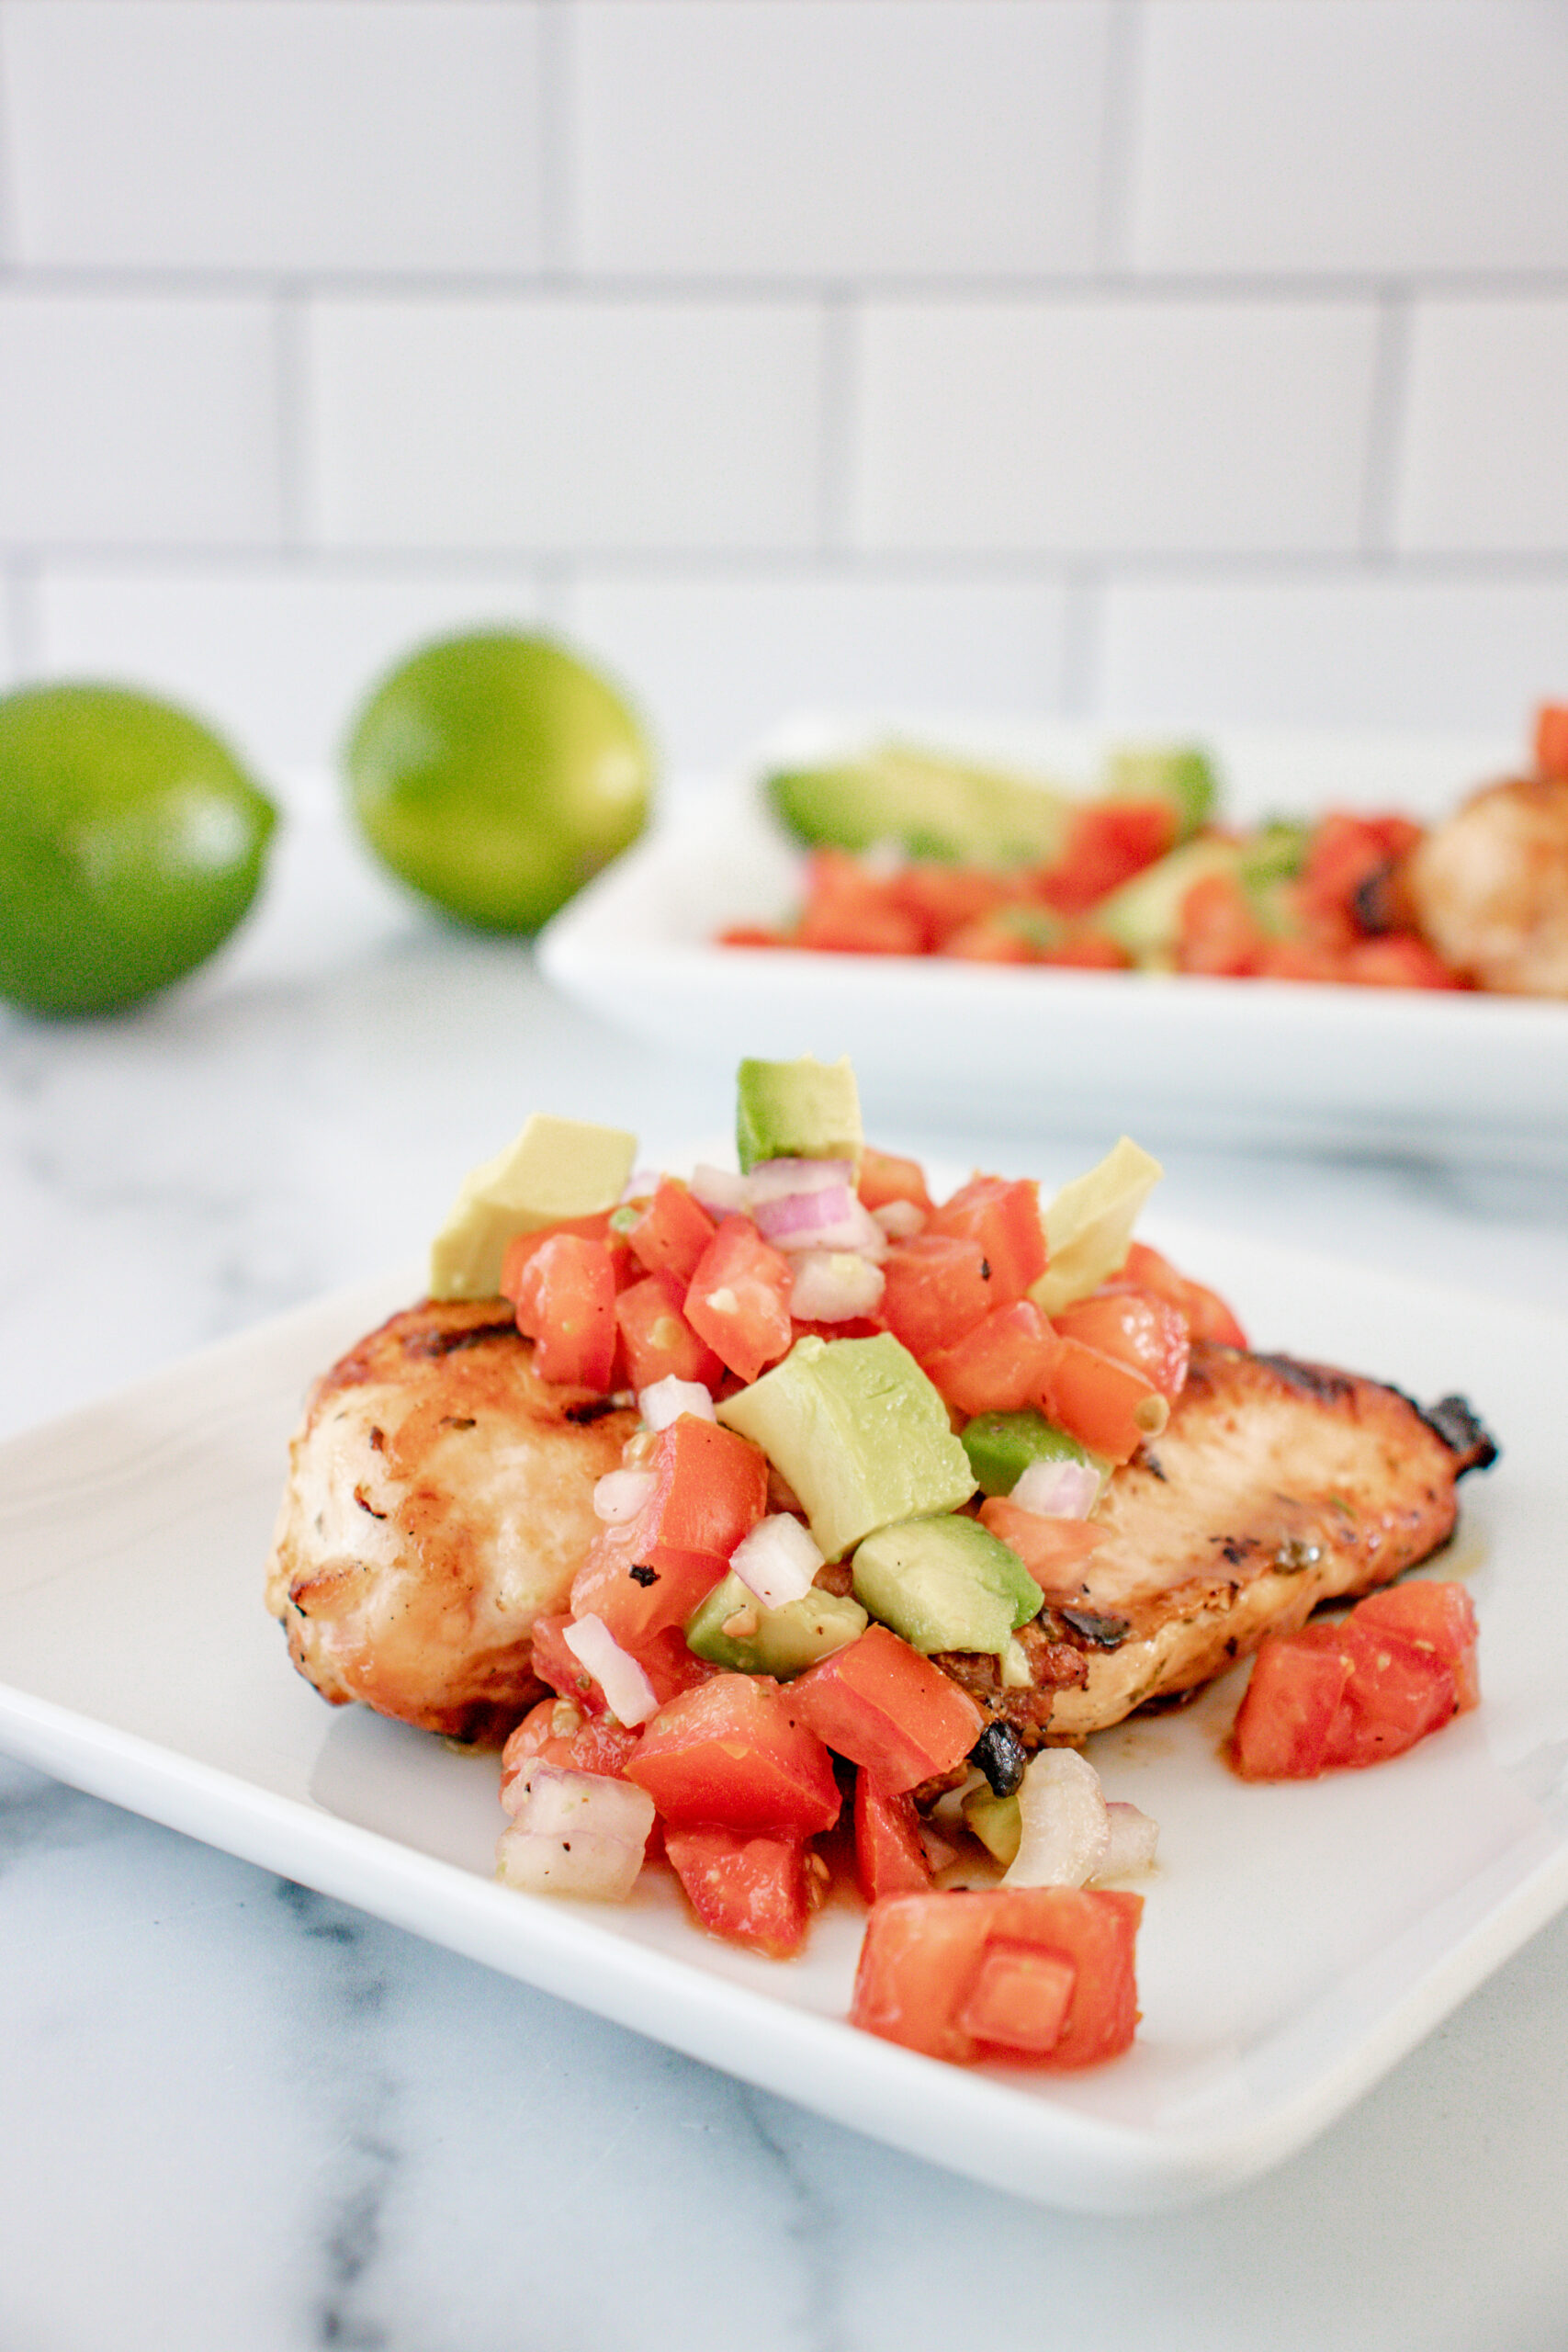 2 white dishes of lime cilantro chicken with avocado salsa and whole limes on the side.